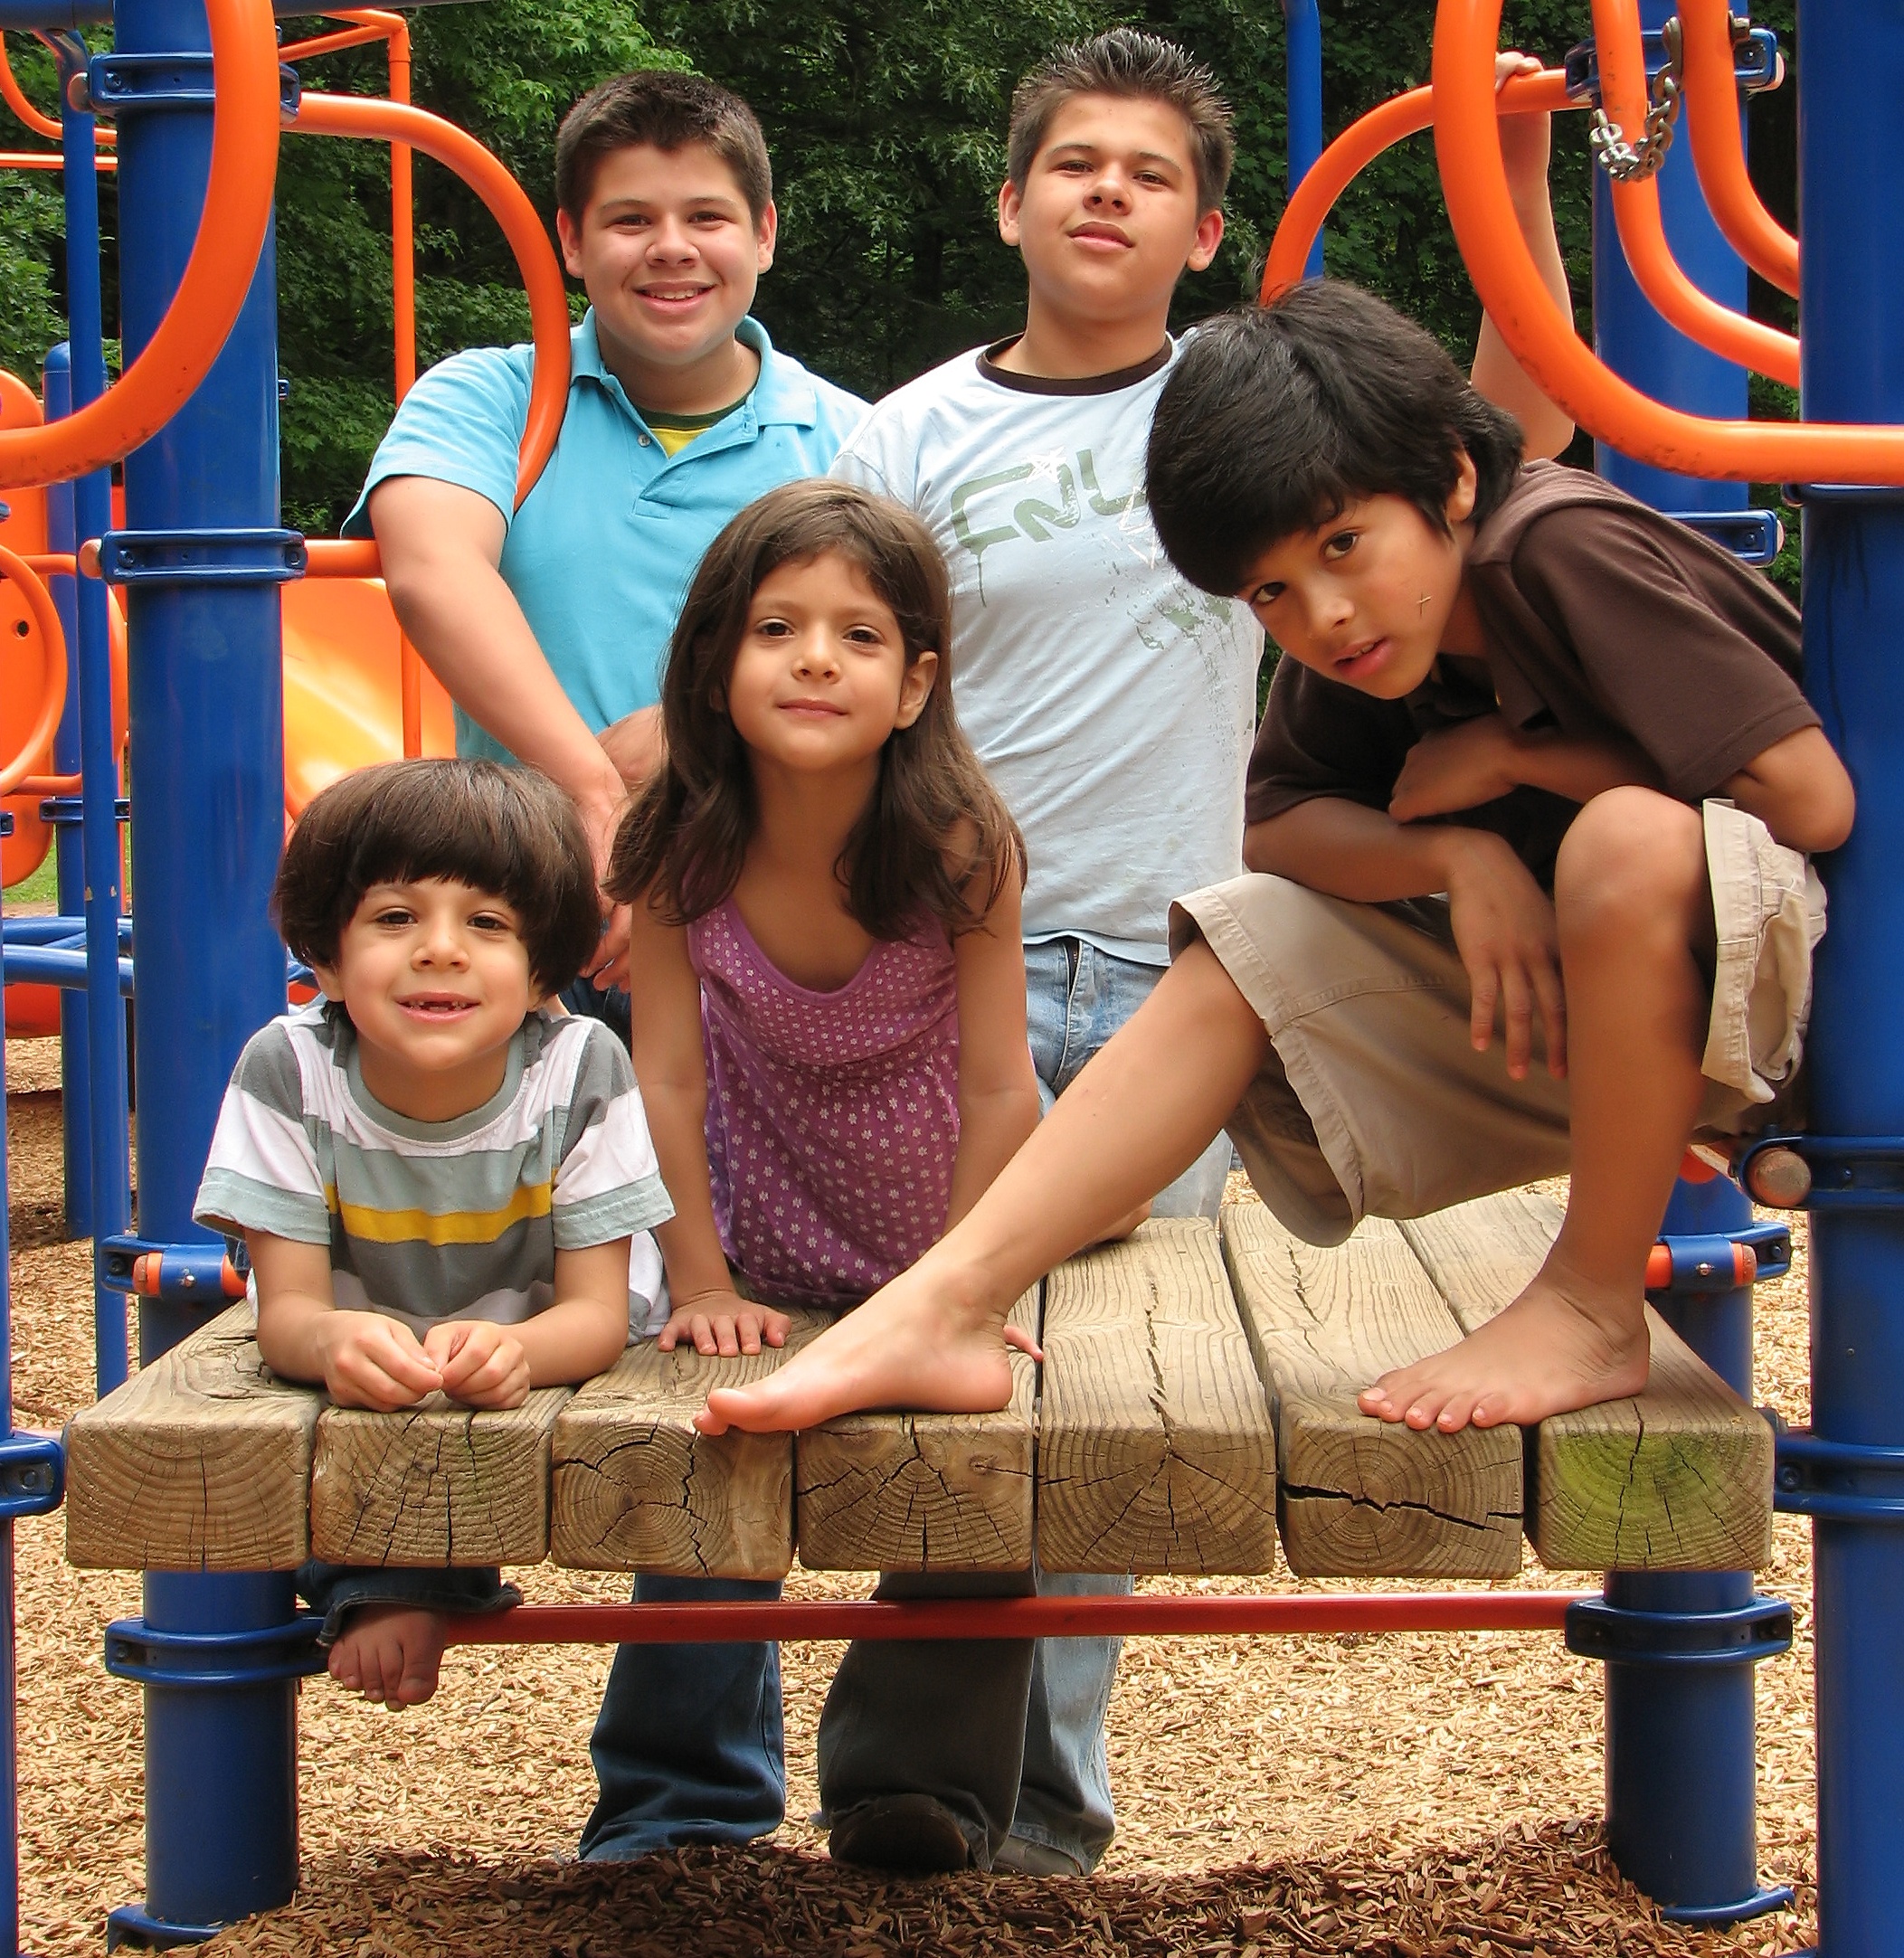 A group of kids posing on a playground, Boys, Industry, Smiles, Recreation, HQ Photo